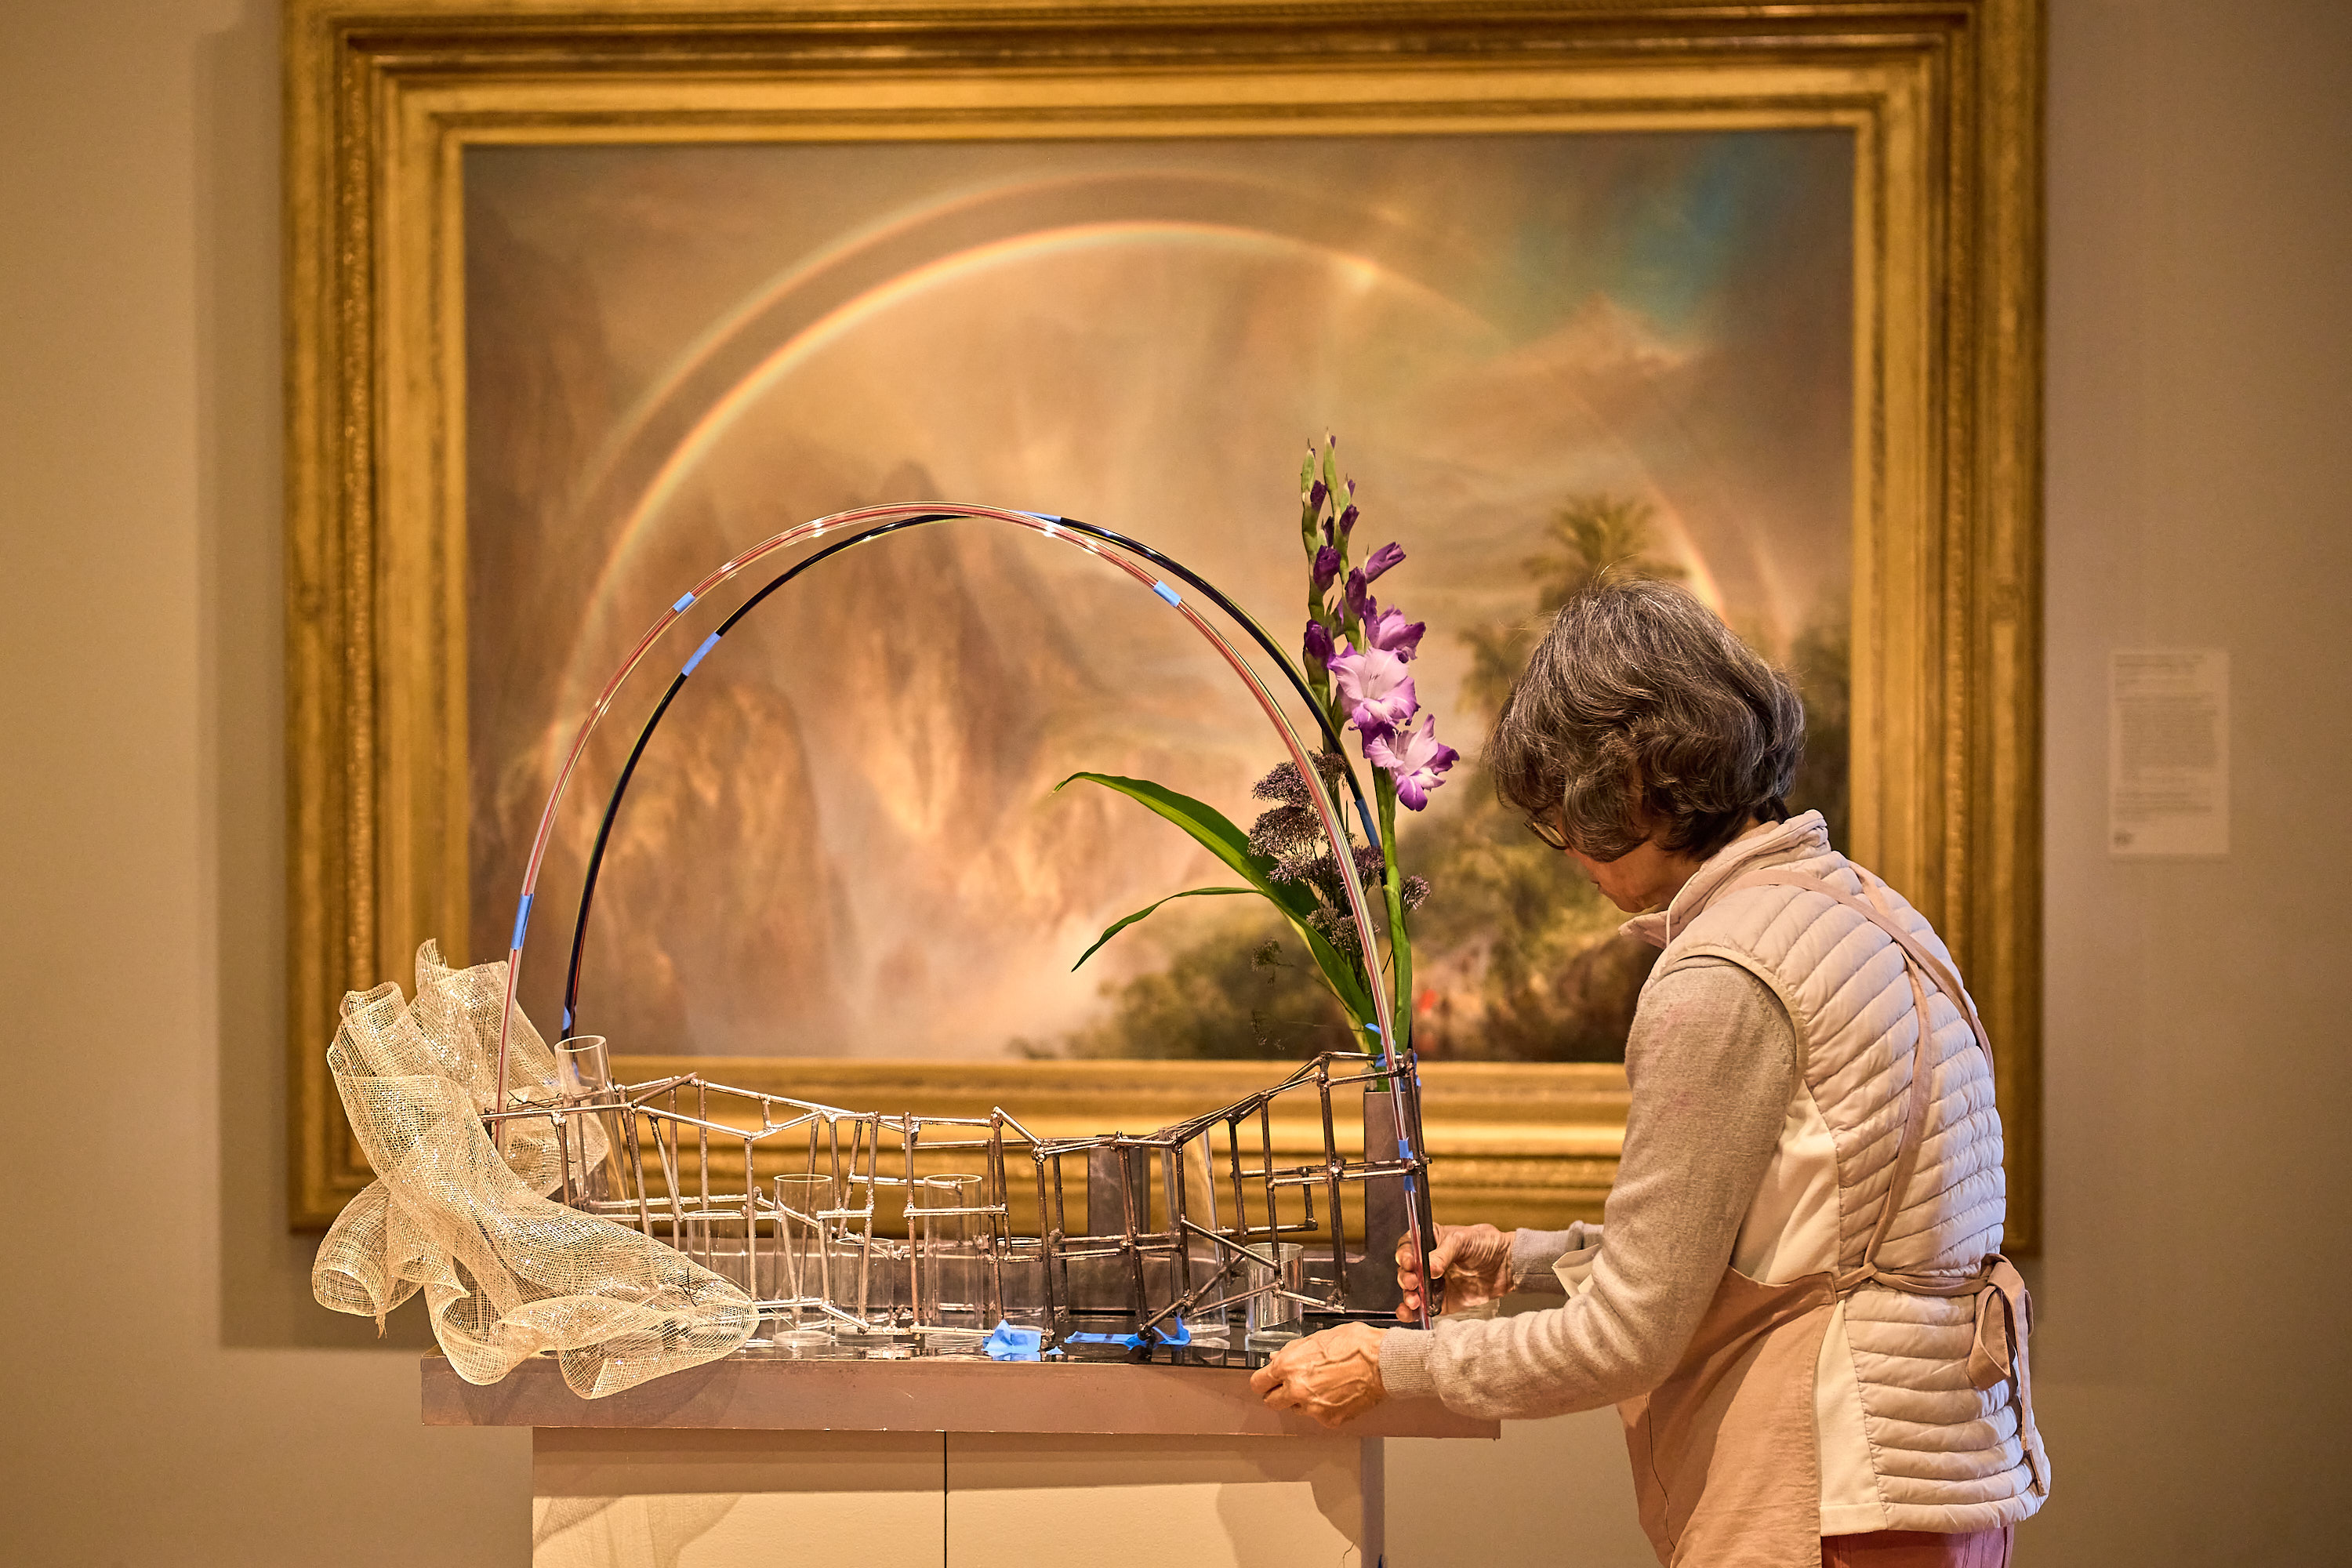 An older woman in a quilted vest arranges flowers in a metal sculpture. A vibrant painting with a rainbow and mountains is visible in the background.